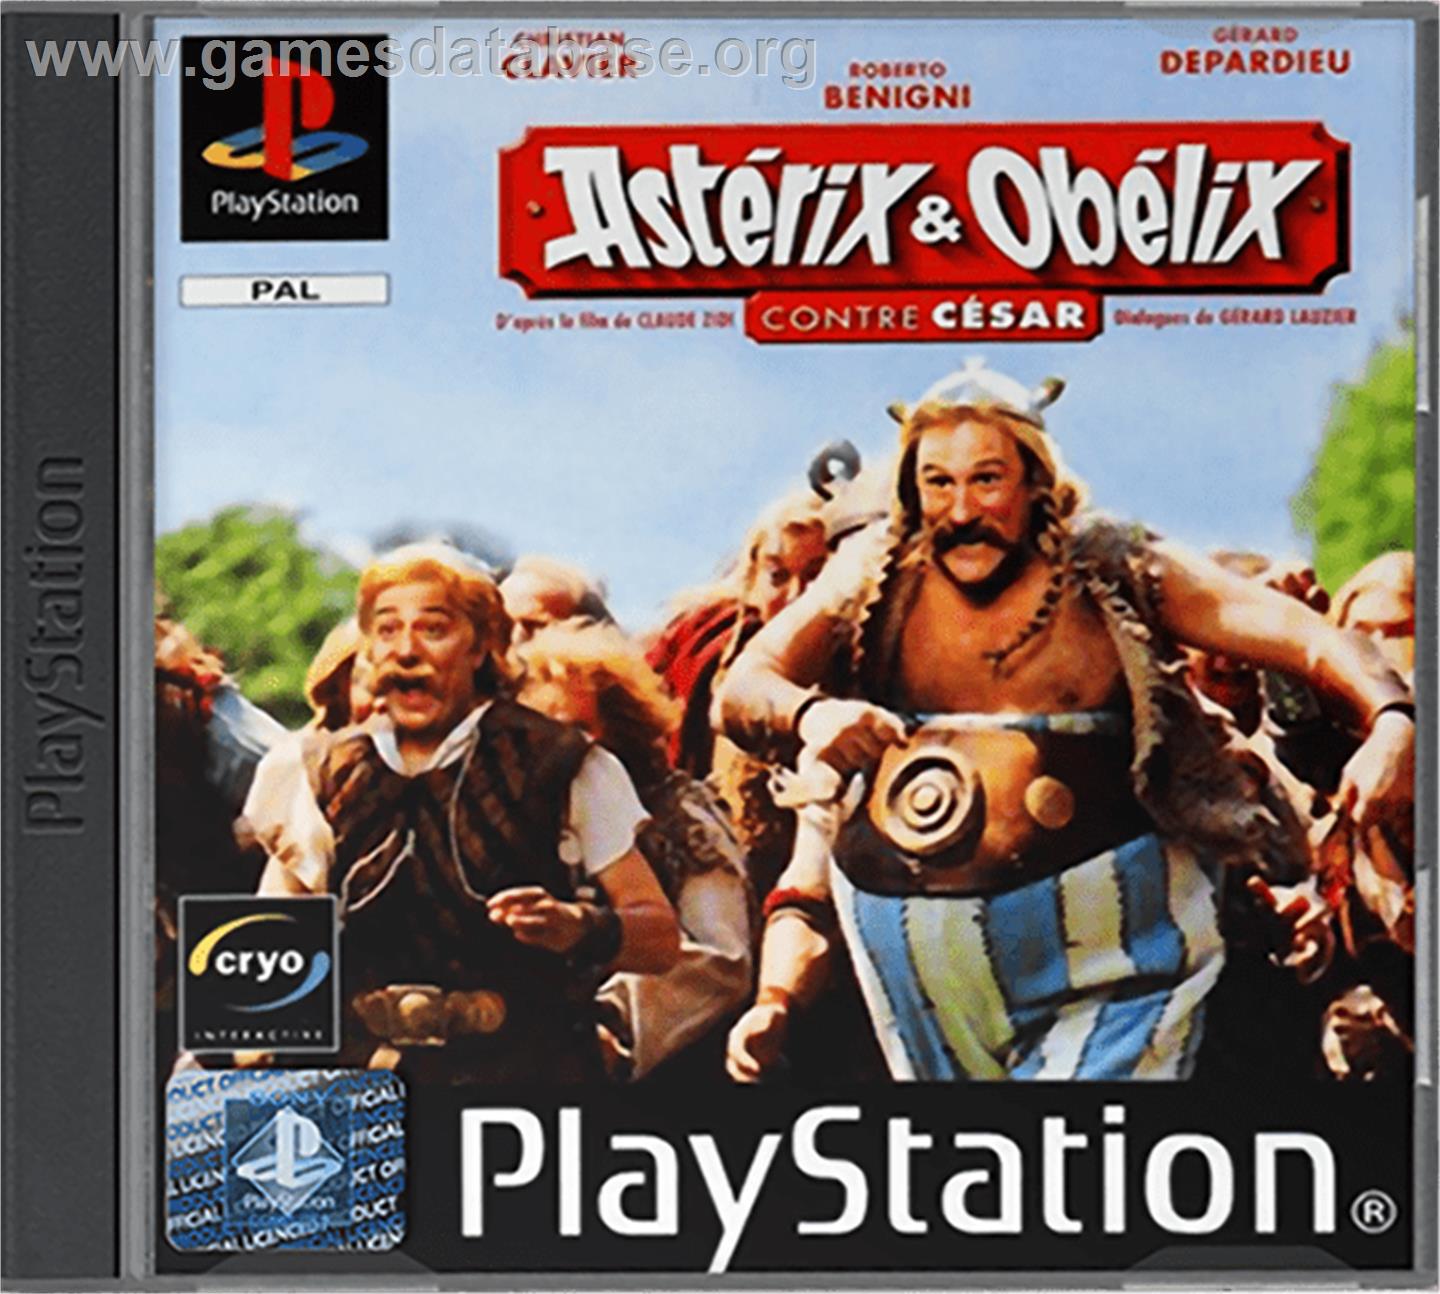 Asterix and Obelix Take on Caesar - Sony Playstation - Artwork - Box